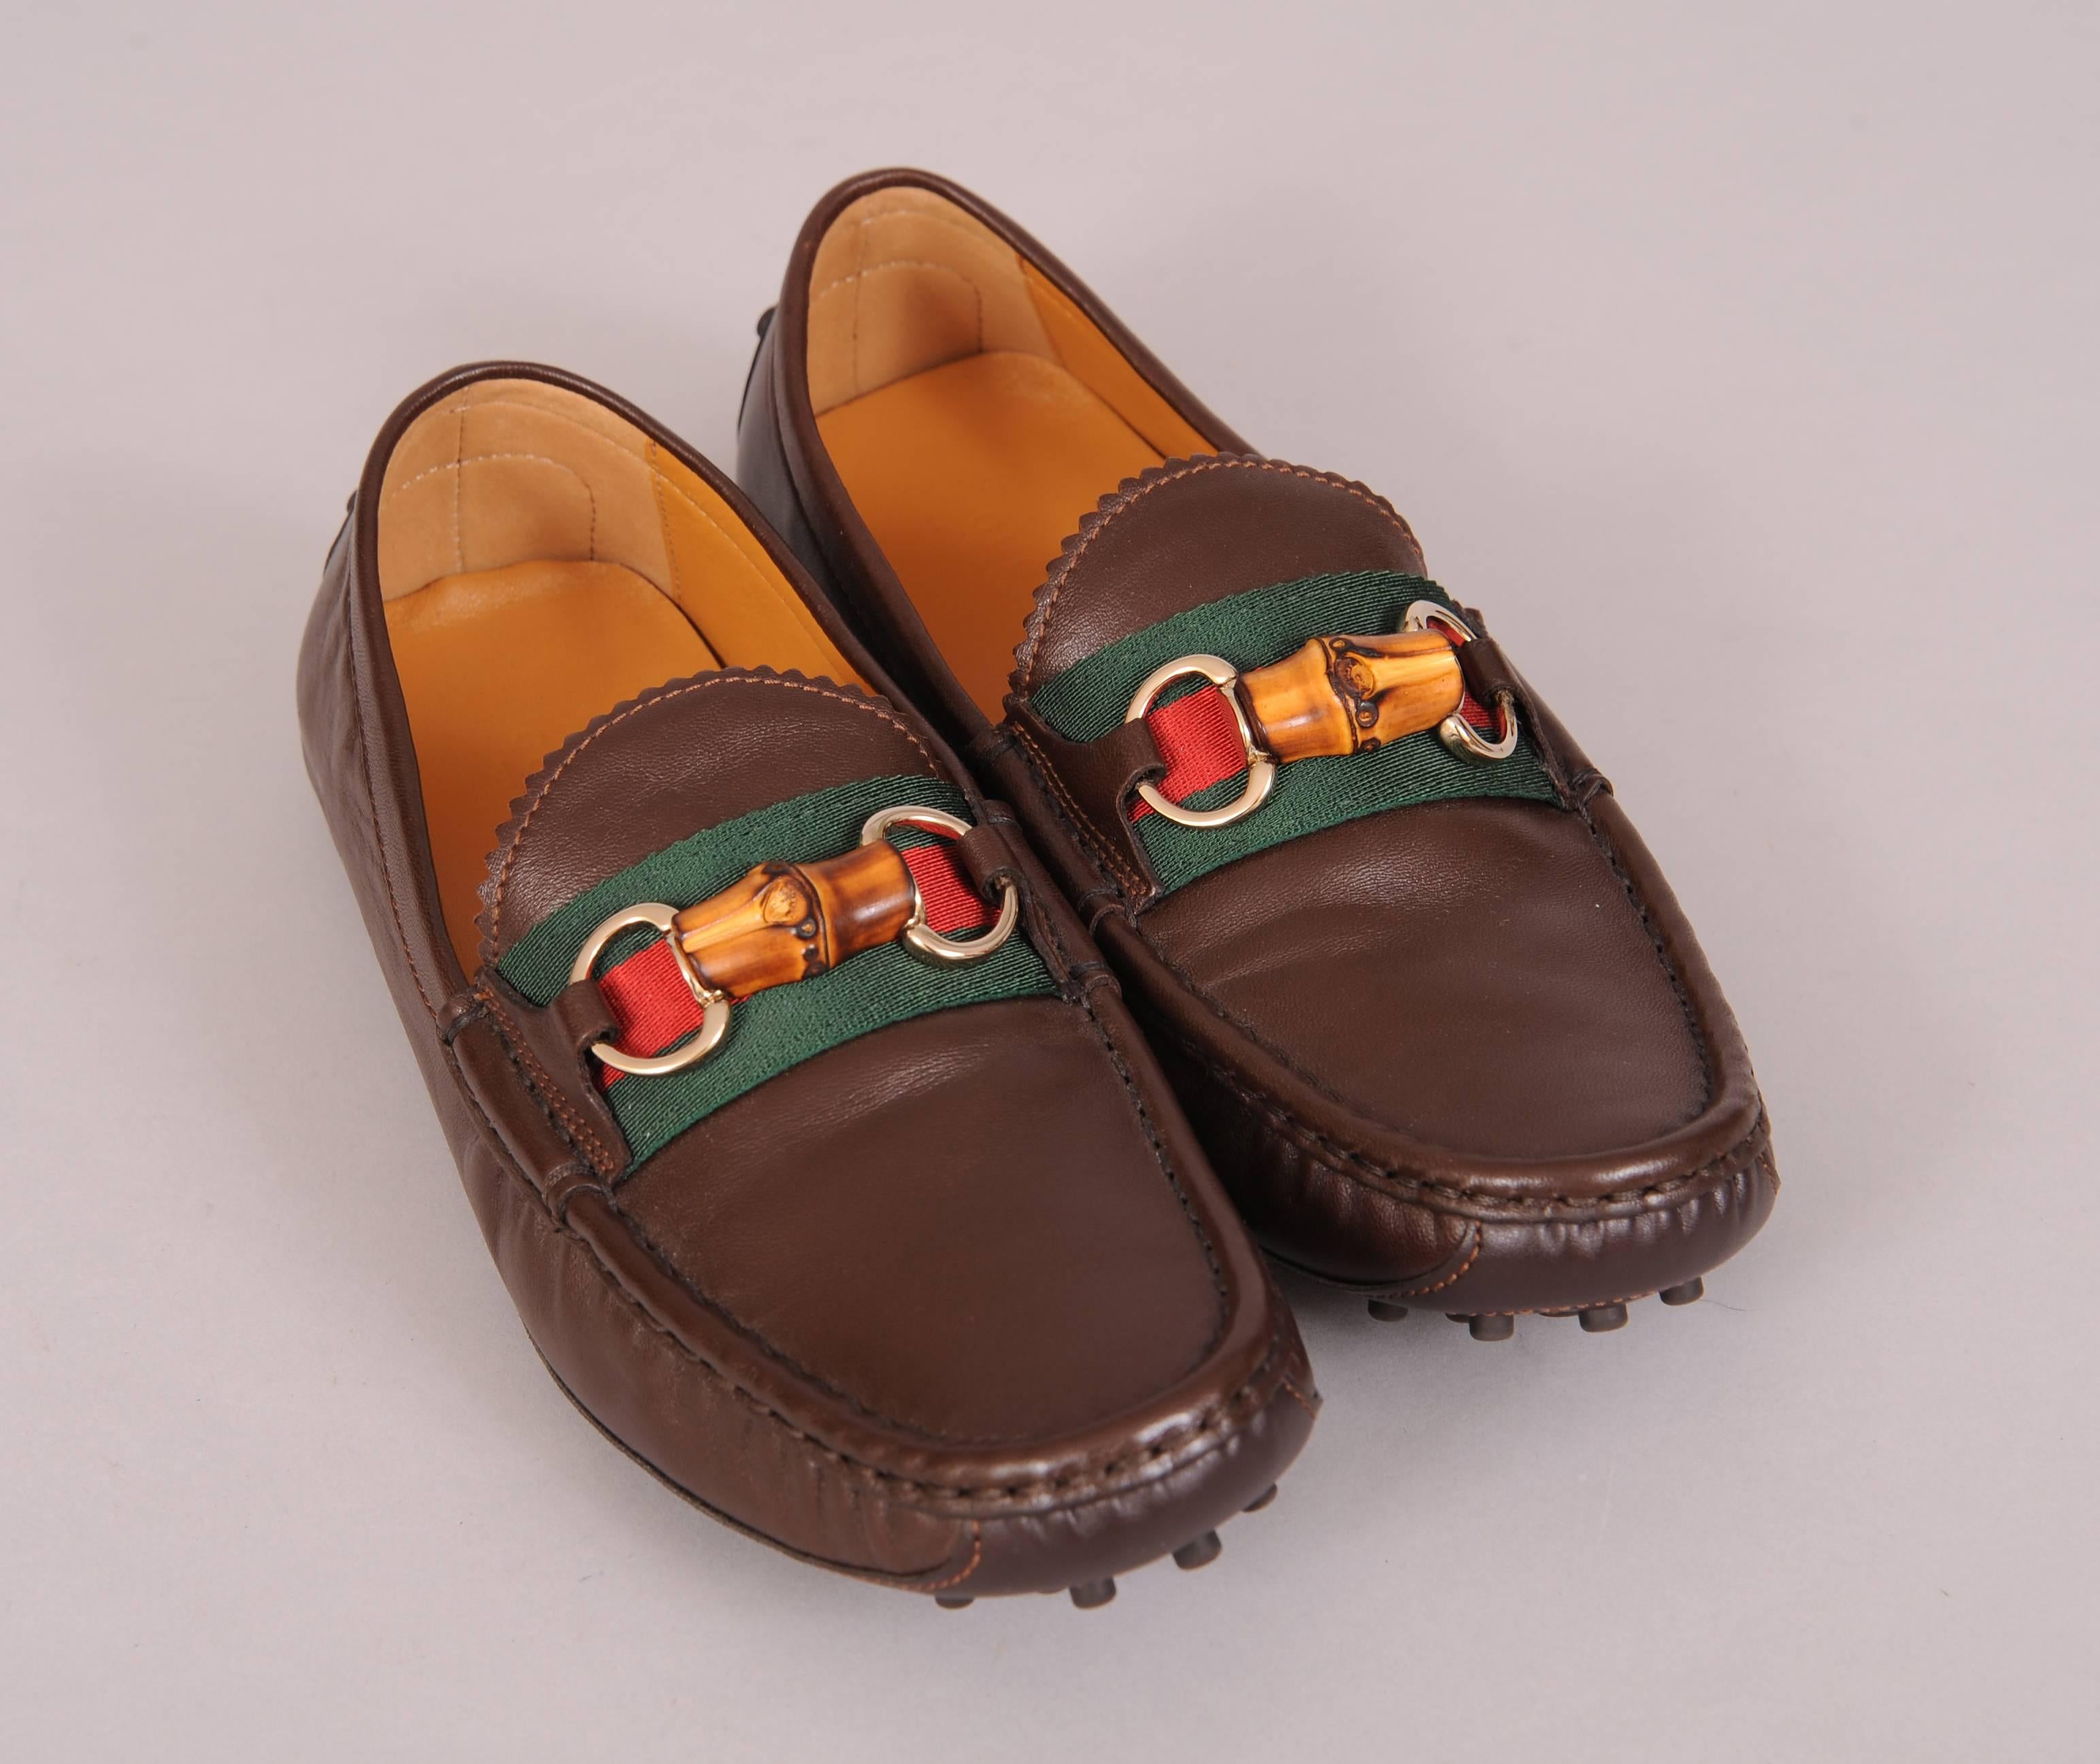 Dark chocolate brown buttery soft leather is accented with the classic Gucci red and green stripes and a bamboo snaffle bit. The loafers have driving soles and a full leather interior. Never worn and marked a size 38 1/2, they are in excellent